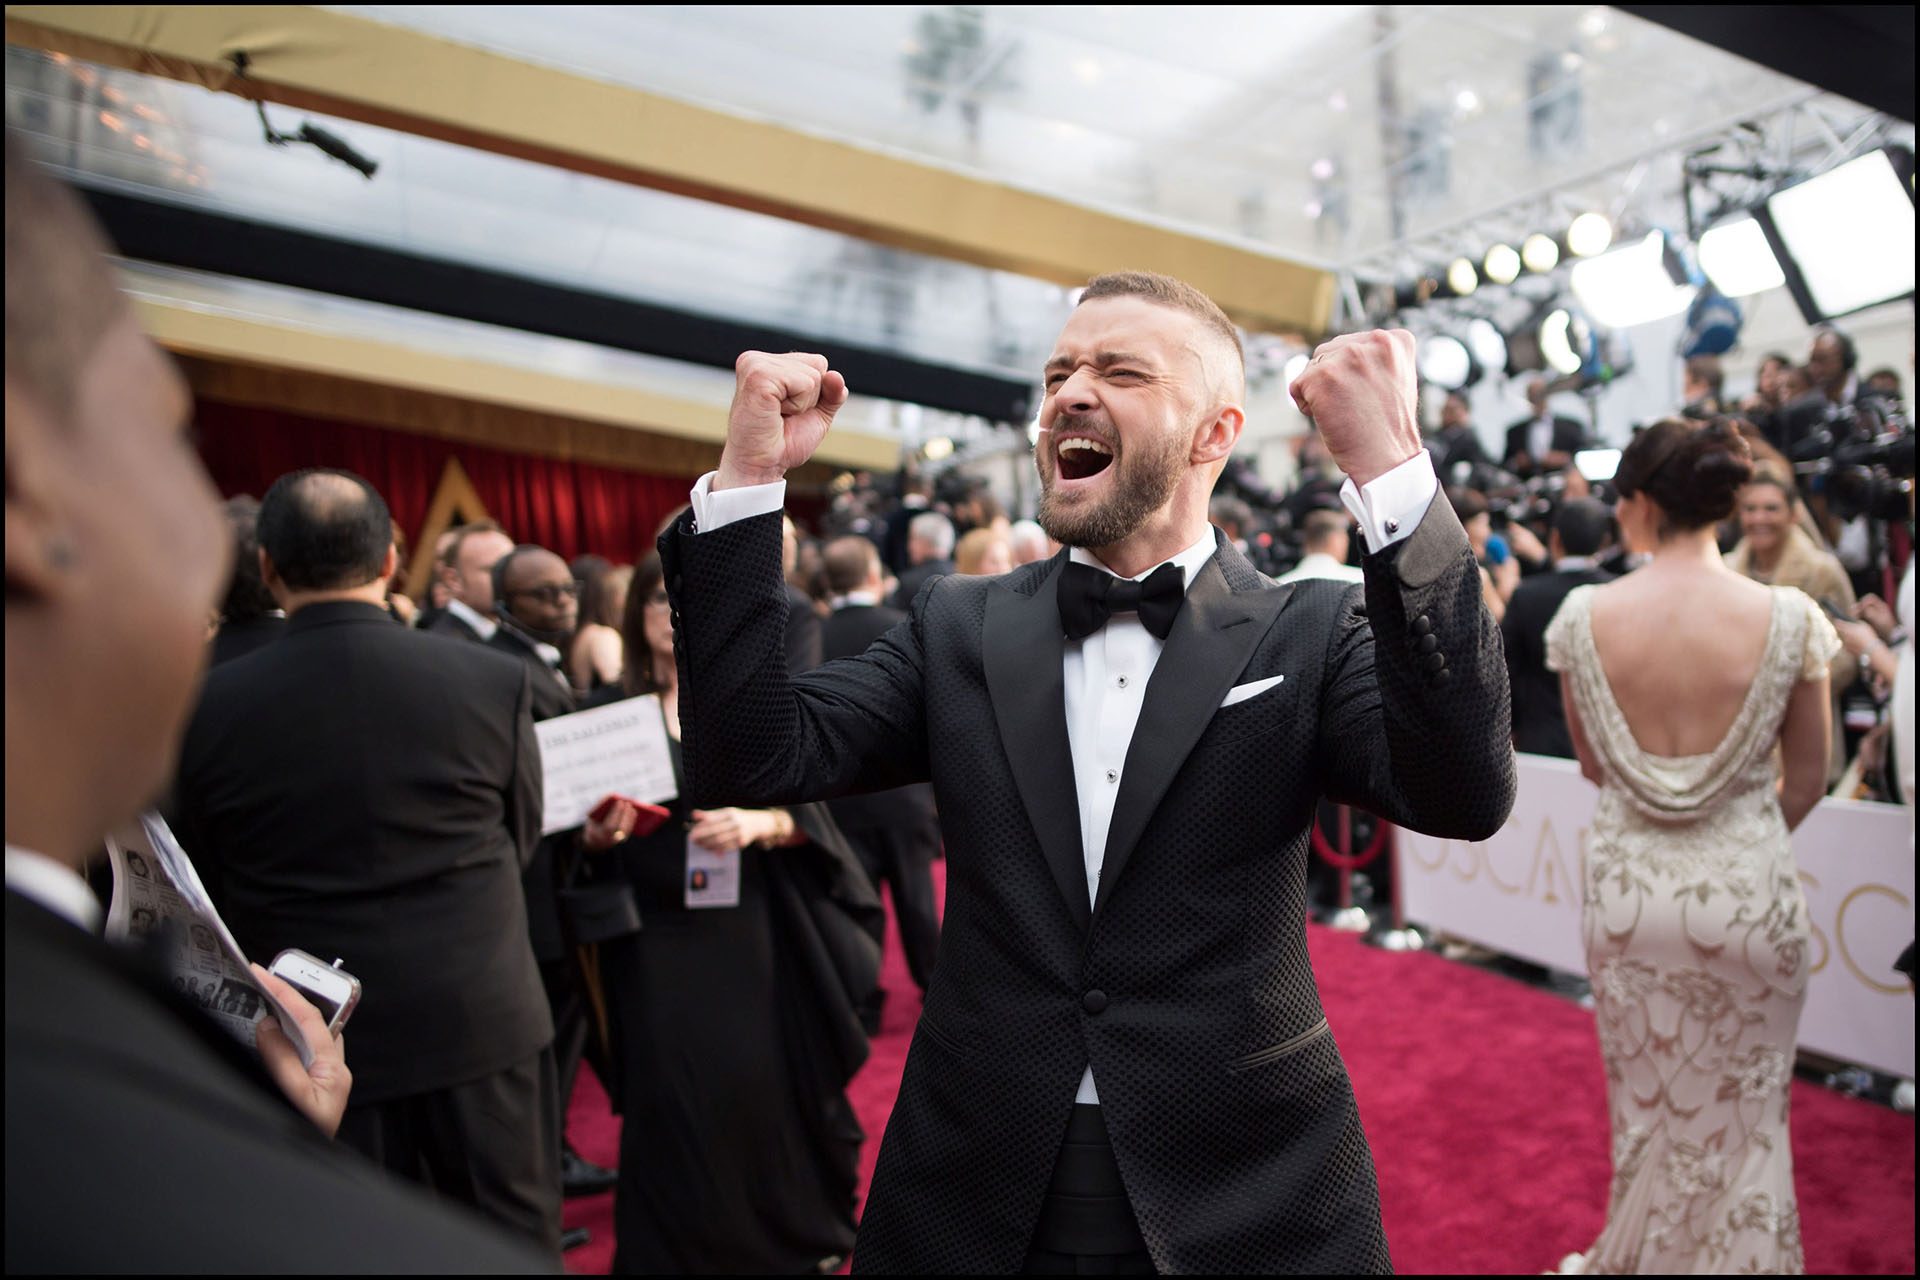 Oscar®-nominee Justin Timberlake arrives at The 89th Oscars® at the Dolby® Theatre in Hollywood, CA on Sunday, February 26, 2017.